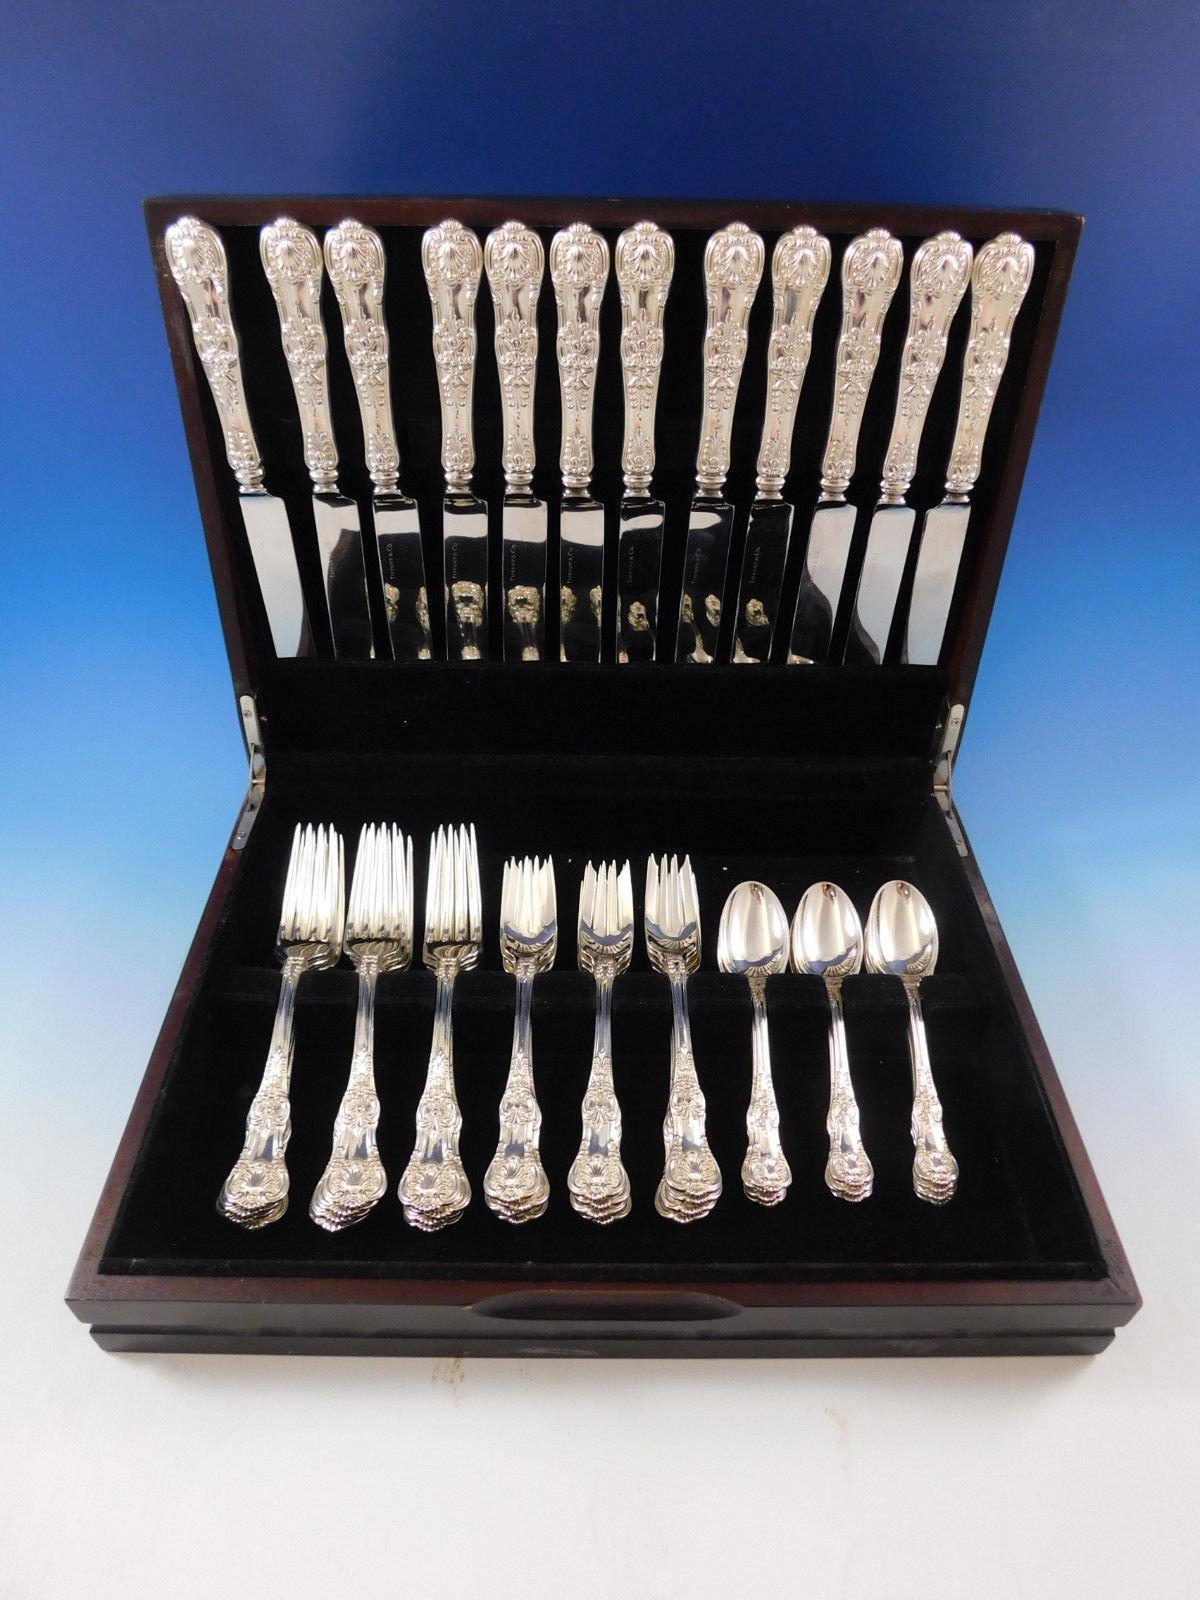 Superb dinner size English king by Tiffany & Co. sterling silver flatware set, 48 pieces. This set includes:

12 dinner size knives, 10 1/8